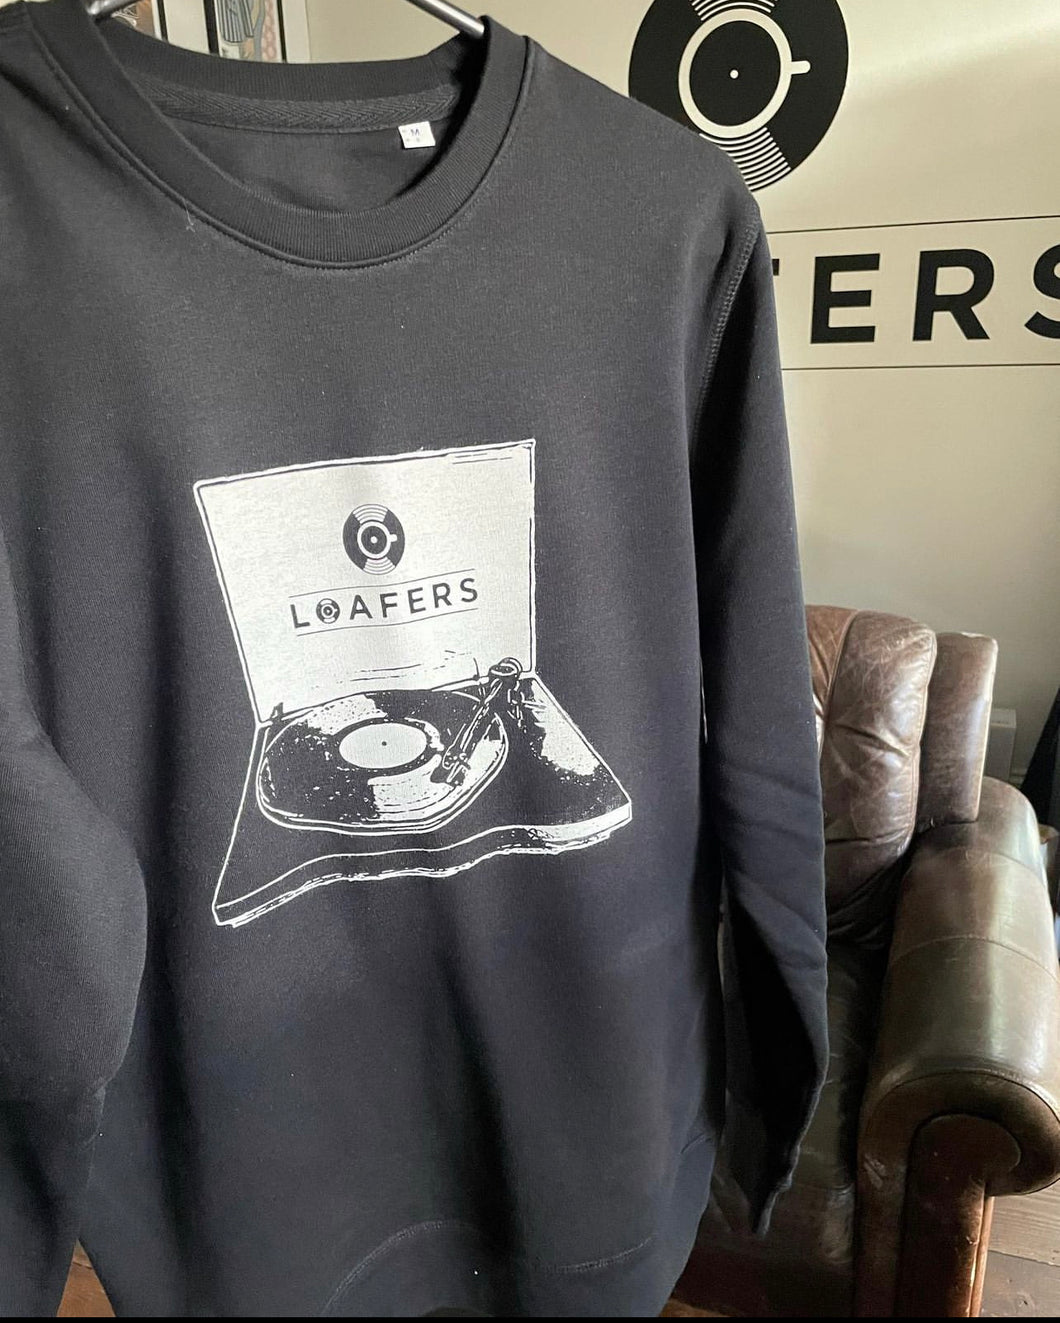 Loafers Crew Neck Sweater